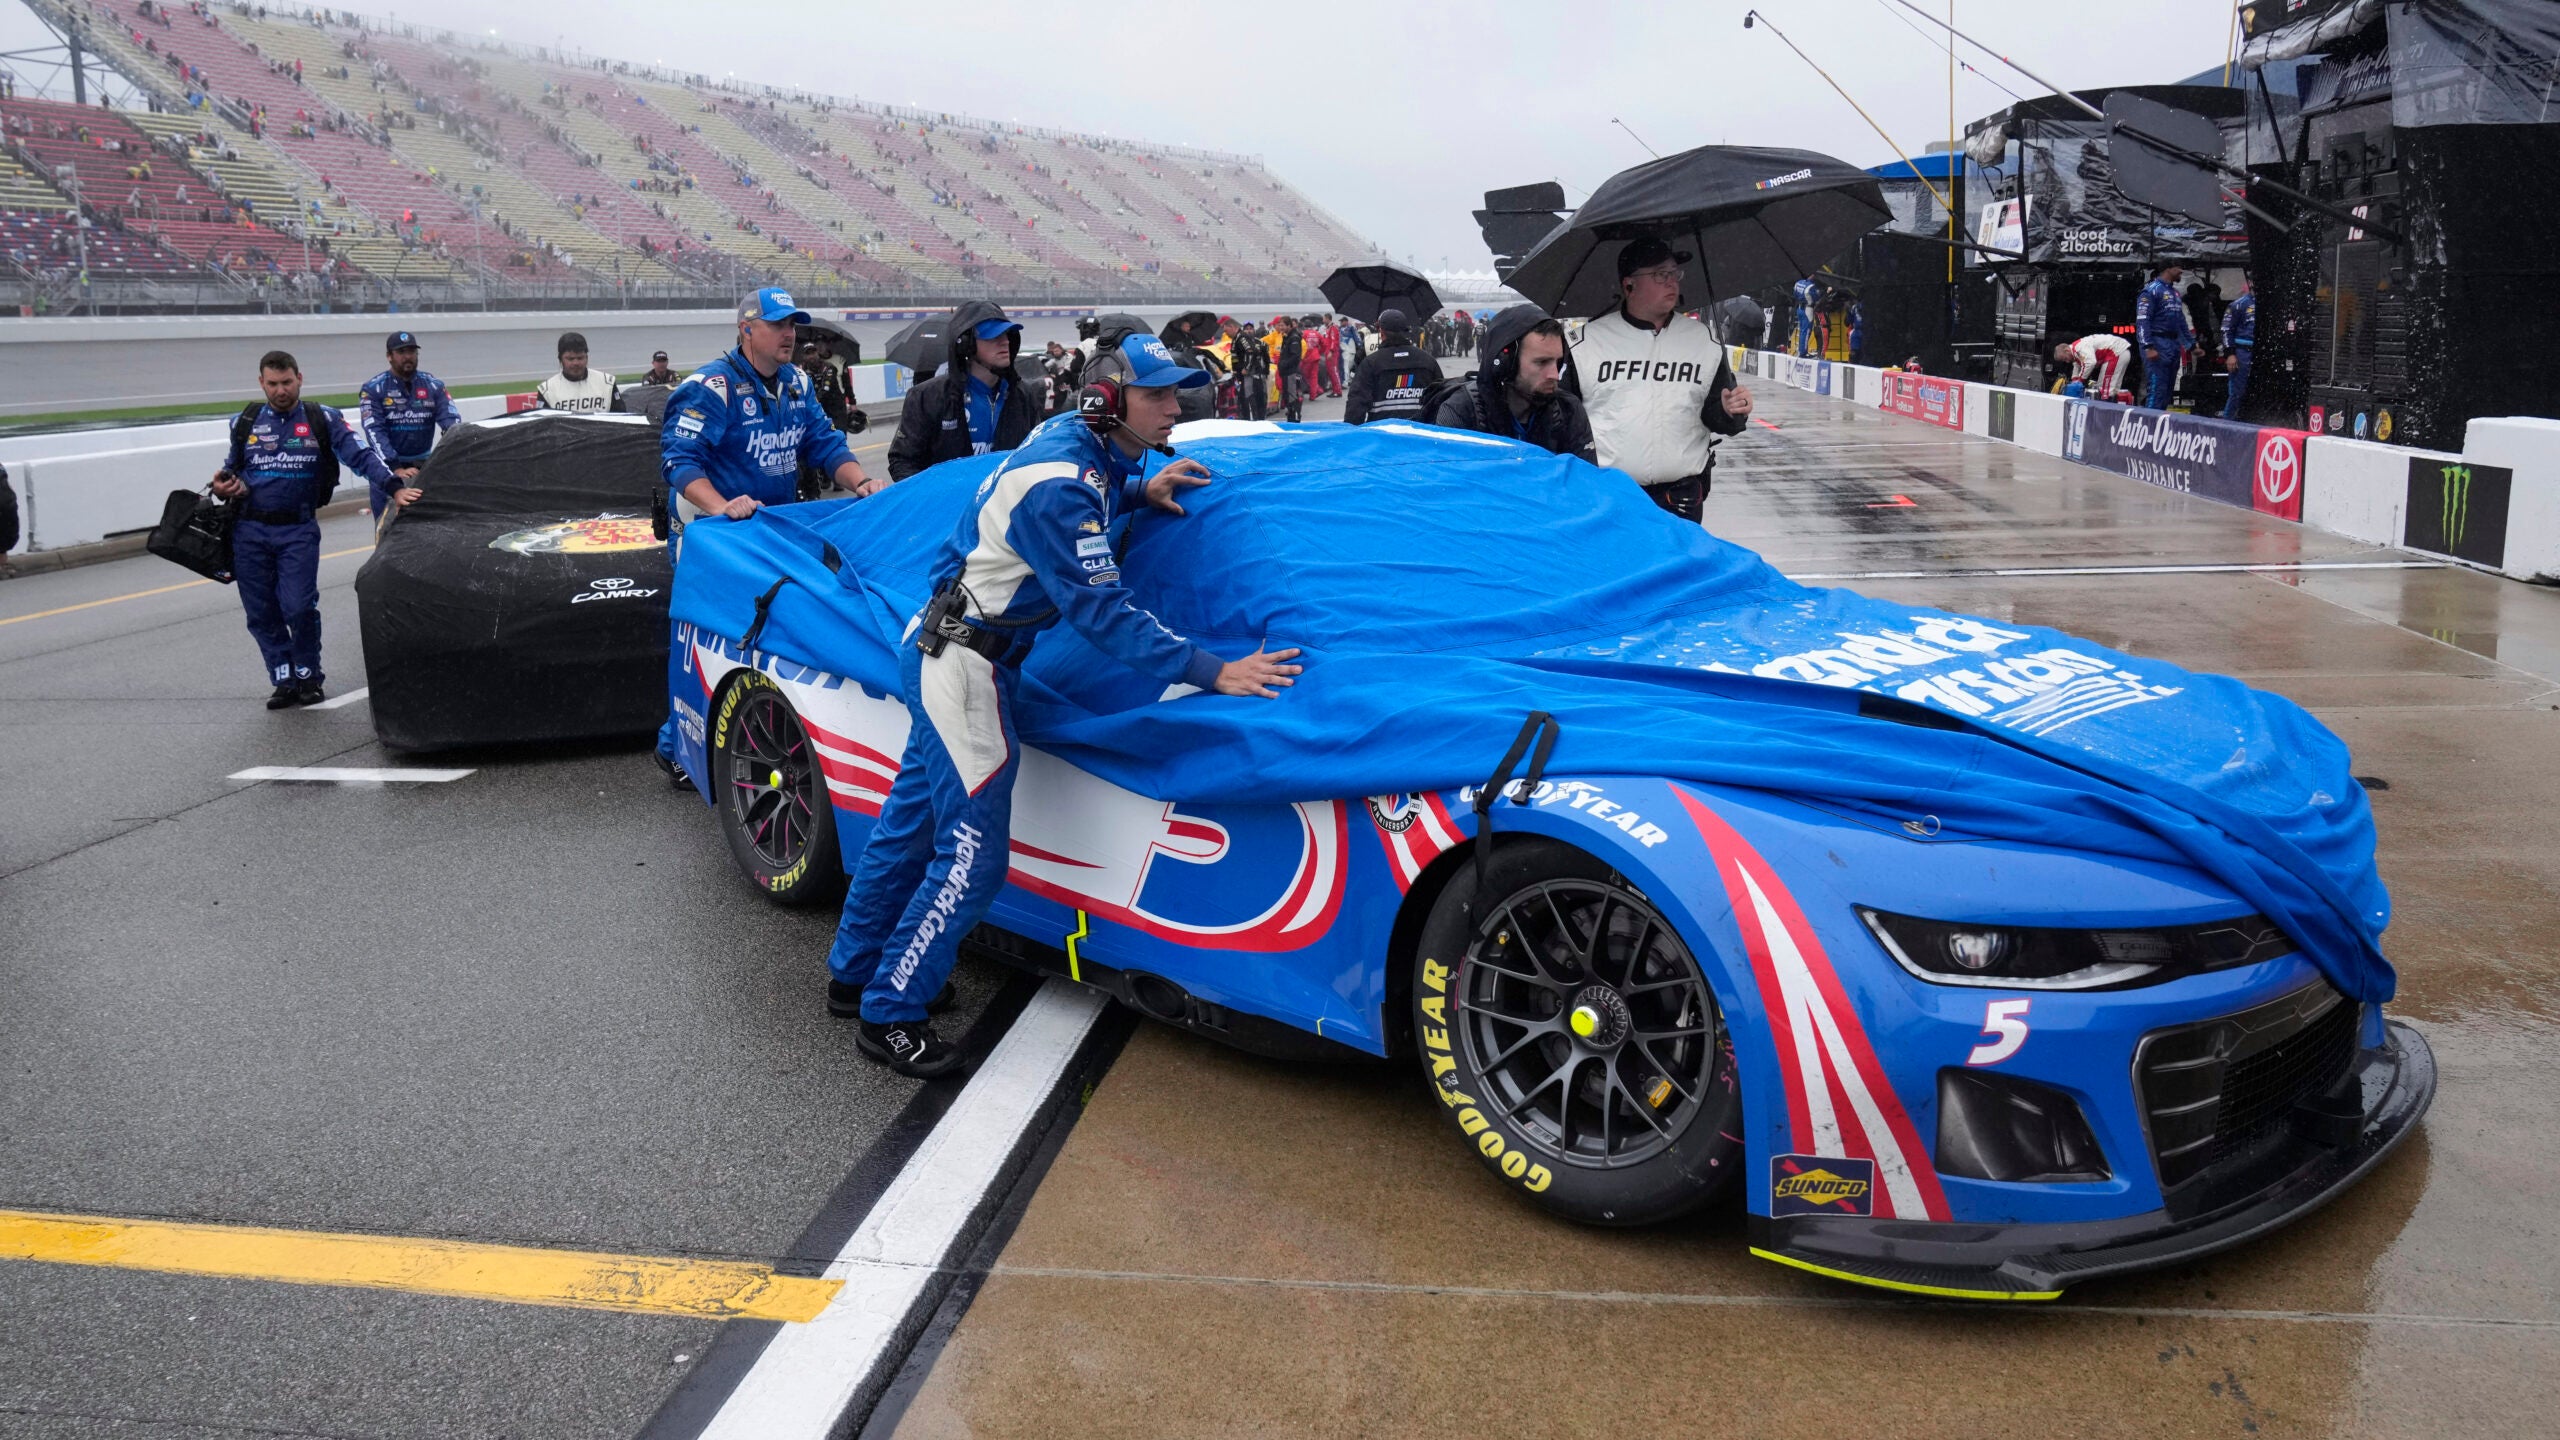 NASCAR suspends race at Michigan due to rain and aims to resume Monday